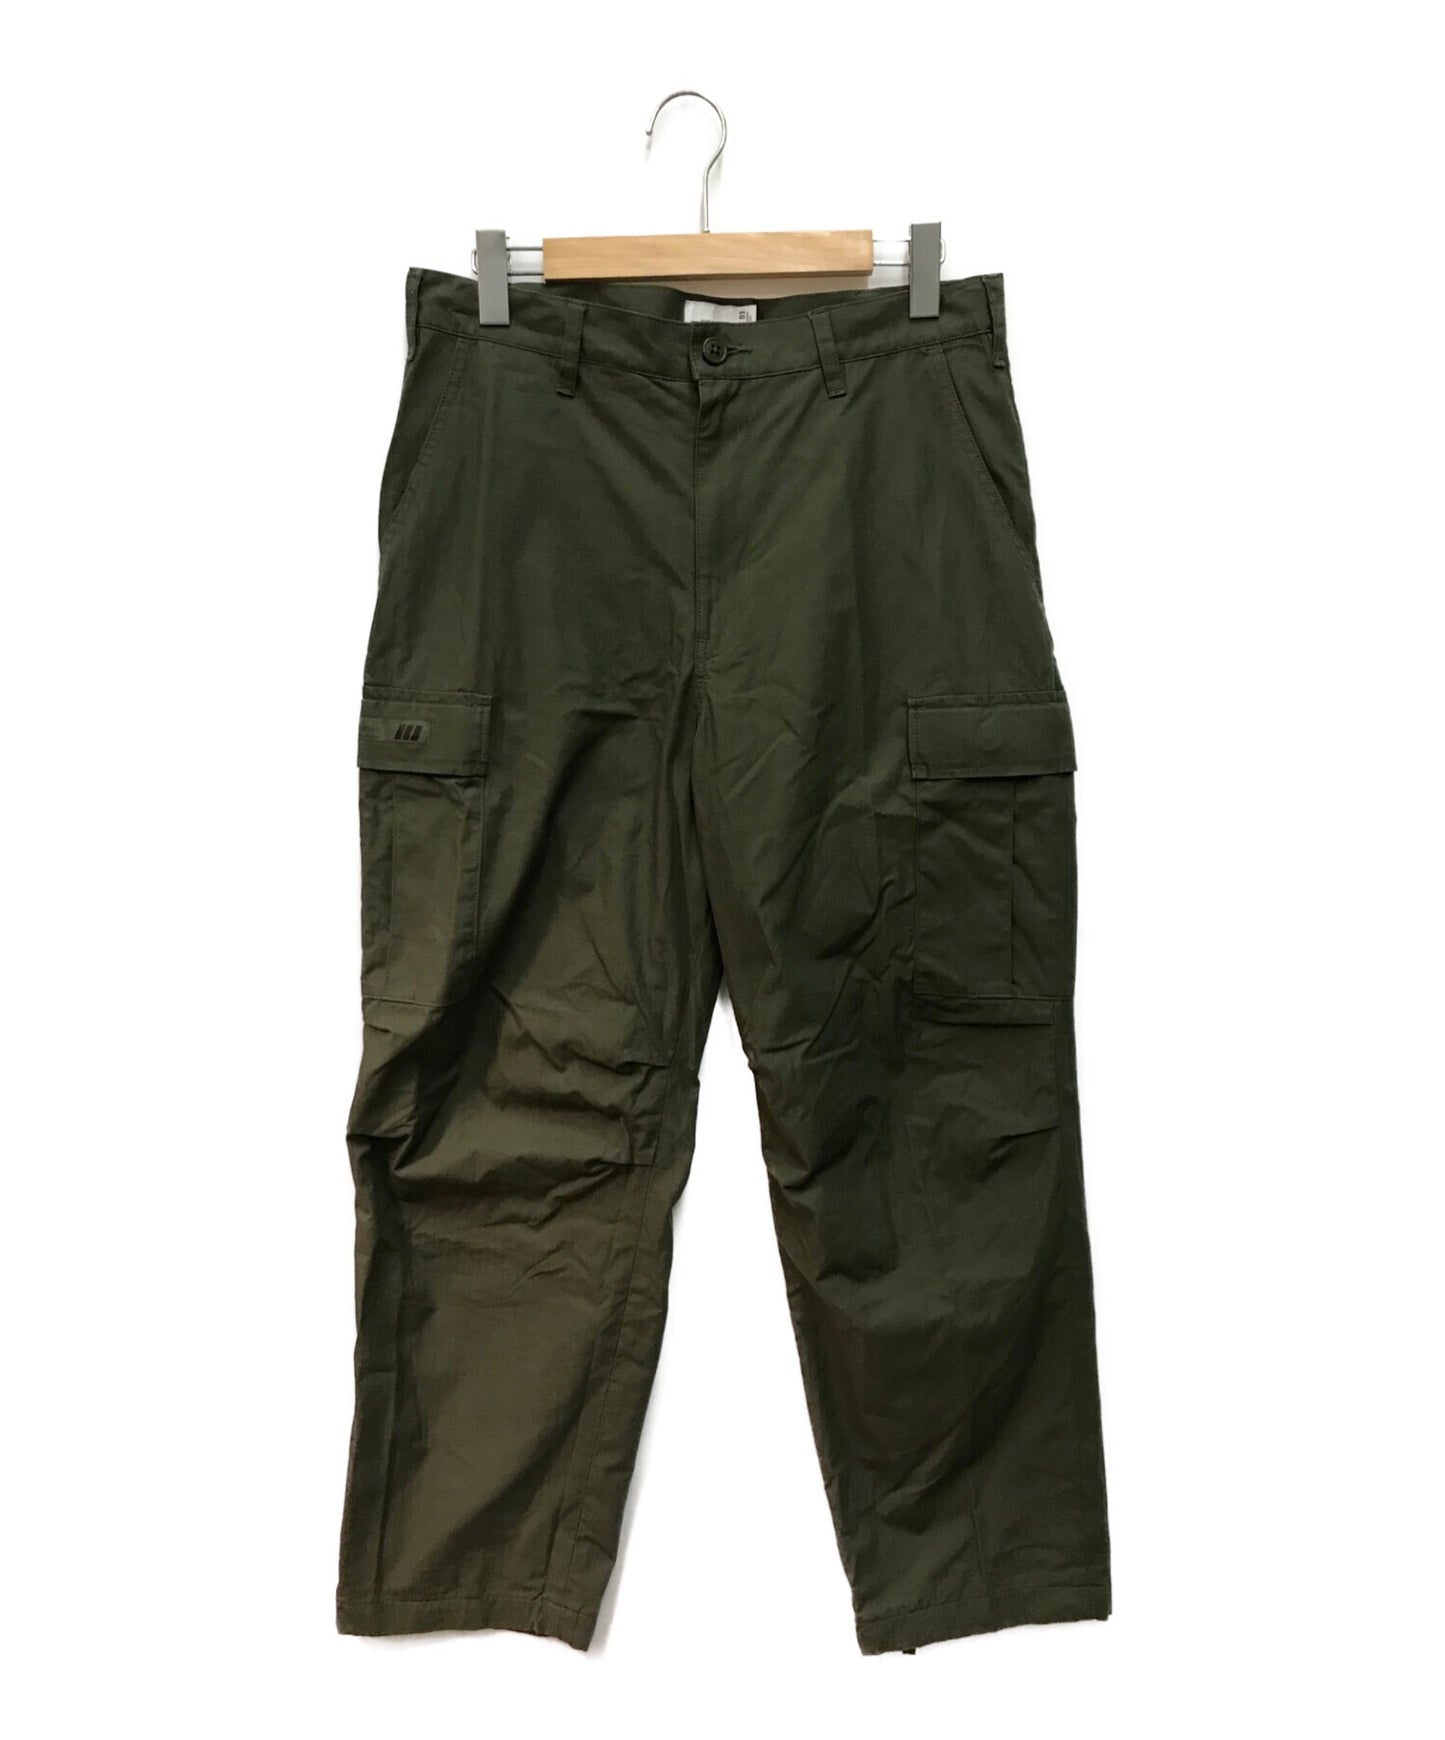 WTAPS JUNGLE STOCK TROUSERS 221wvdt-ptm02 | Archive Factory